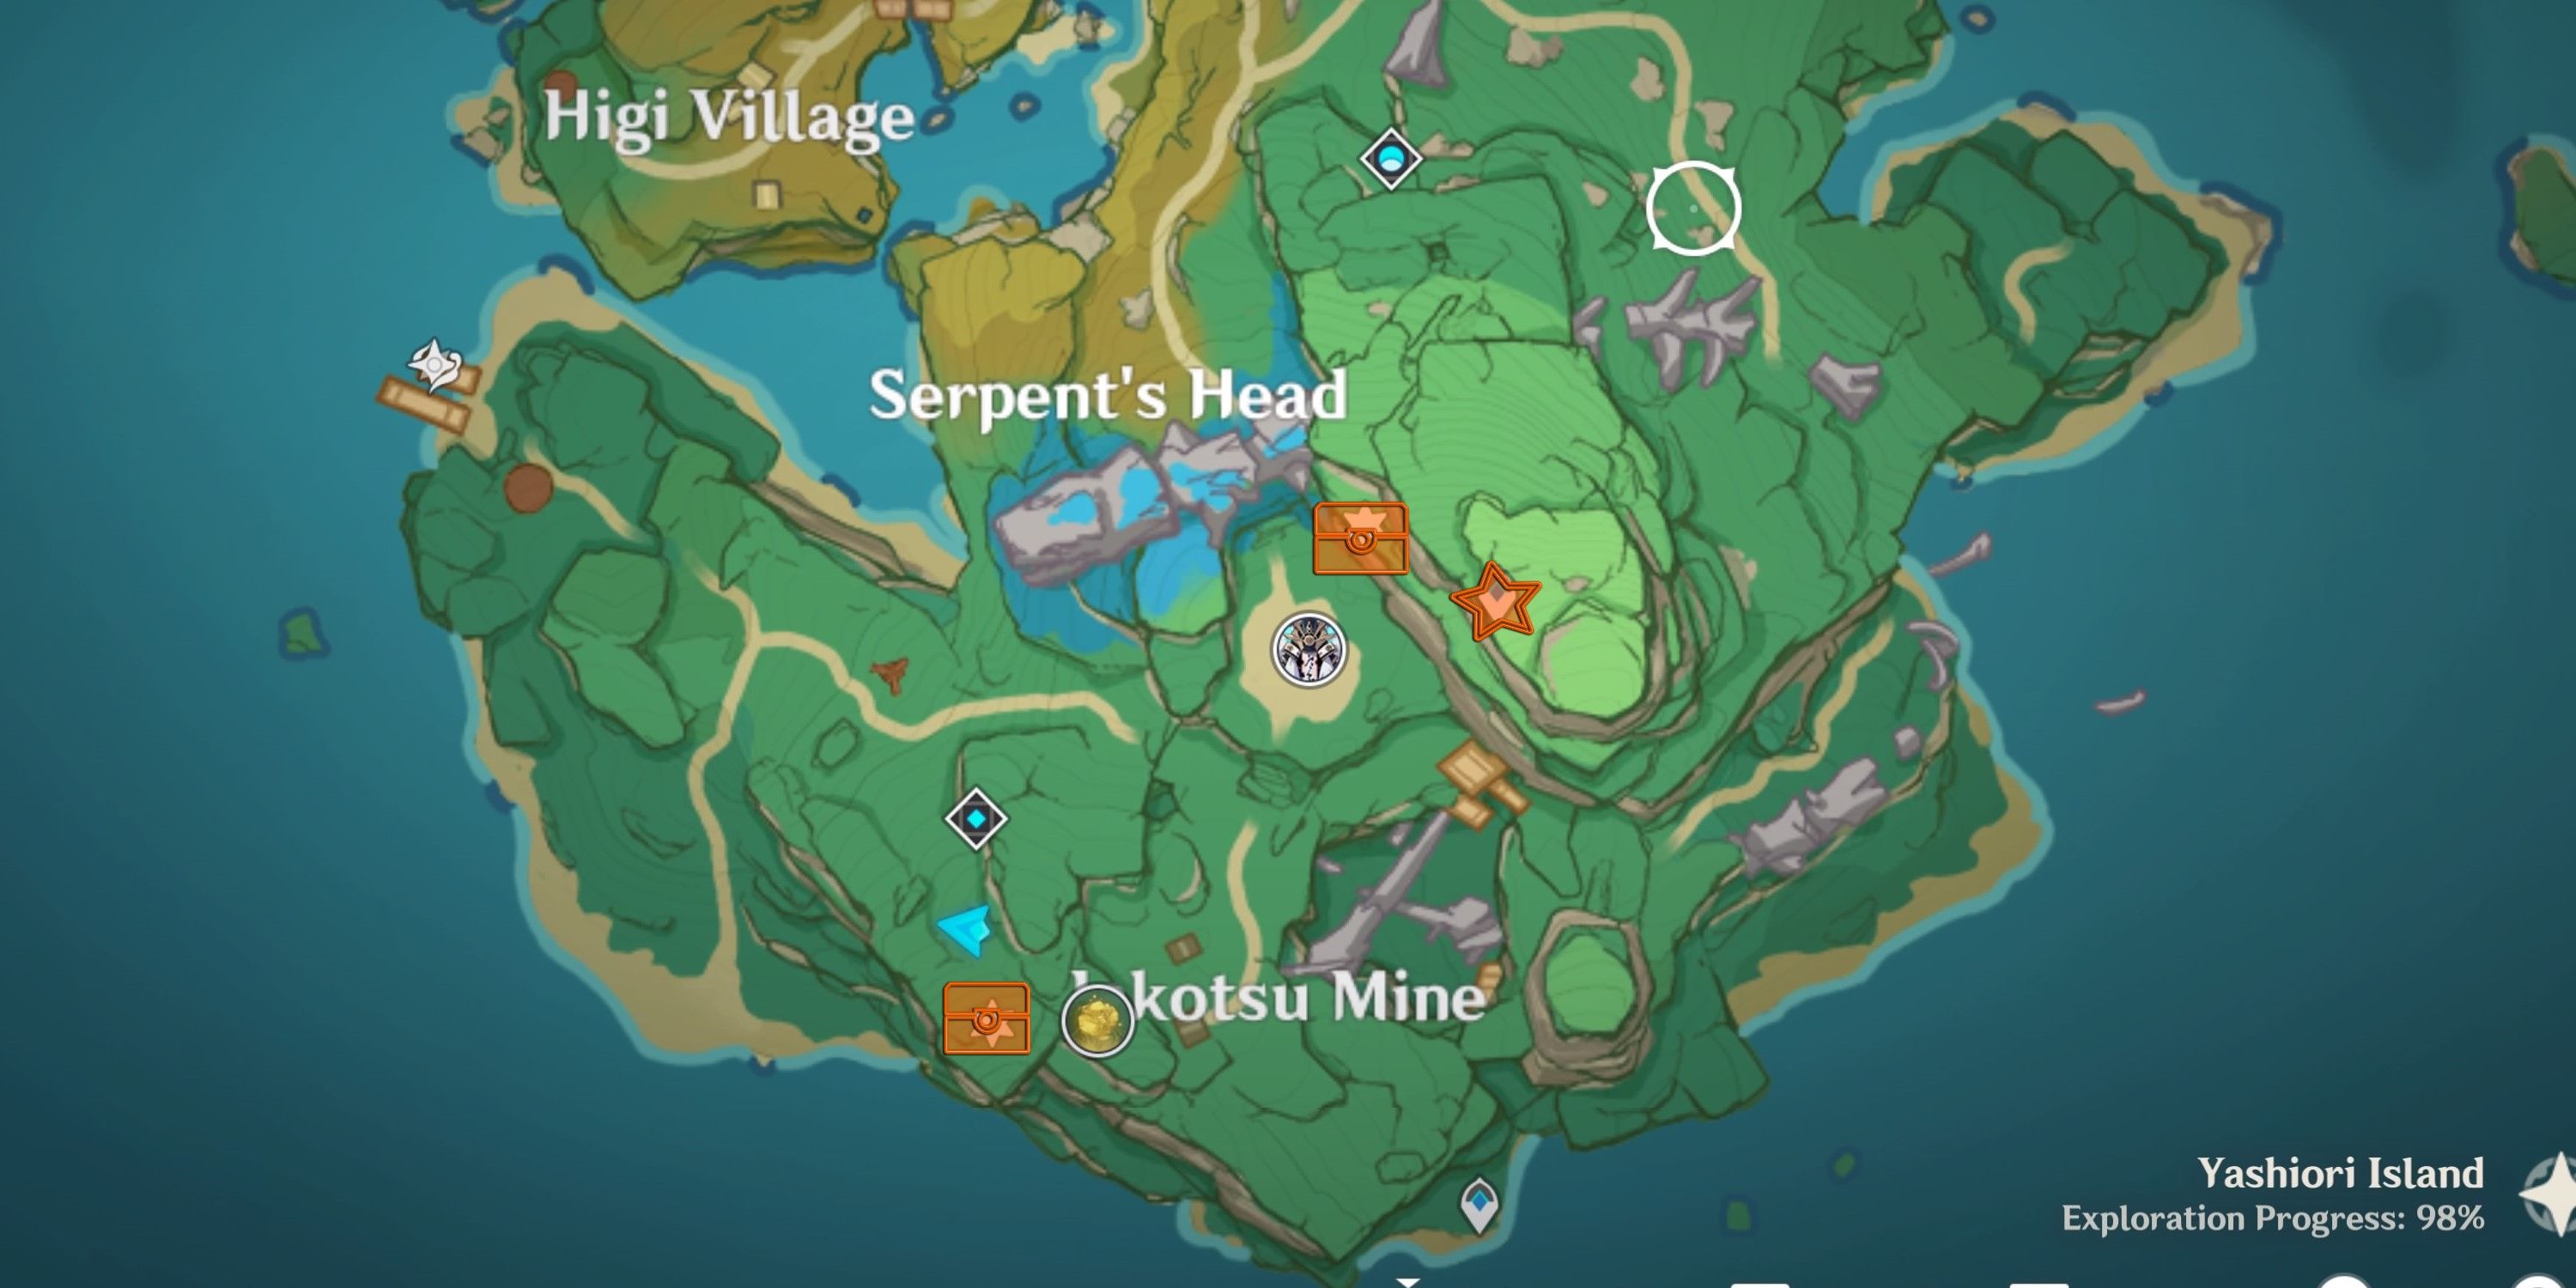 Genshin Impact: Shrine of Depth Map showing Yashiori Island, the map shows highlighted areas